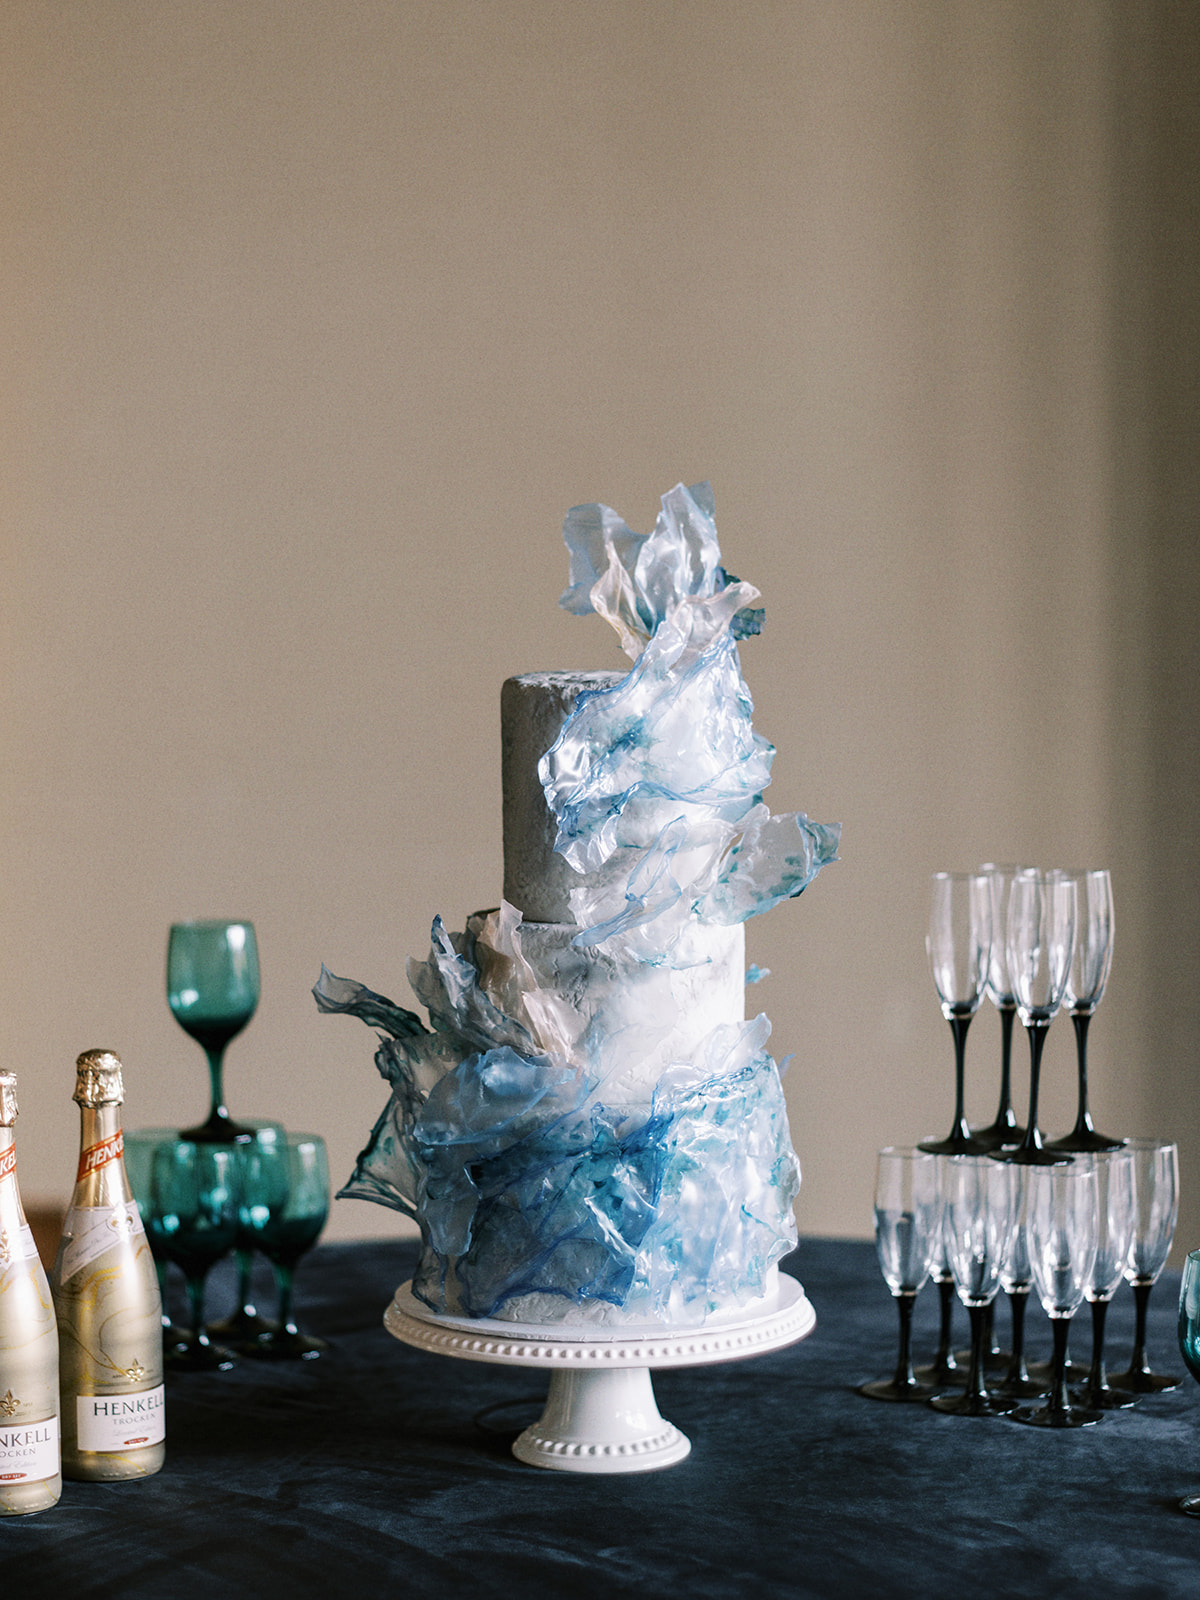 Contemporary and elegant cool-toned wedding cake by Bake My Day at The Malcolm Hotel featuring Mediterranean-inspired decor in oceanic colour palette. 